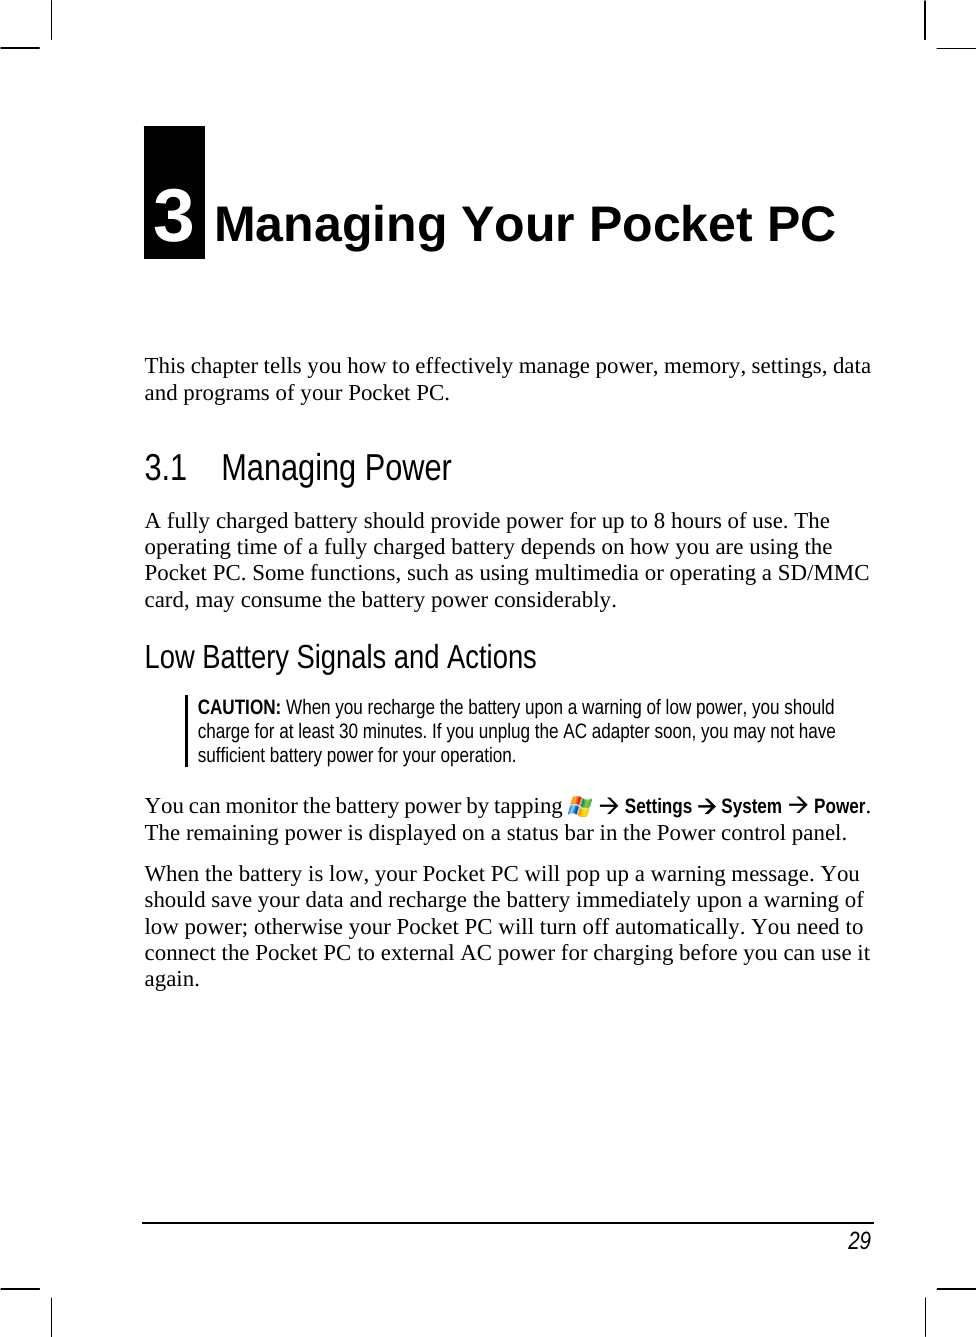   29 3 Managing Your Pocket PC This chapter tells you how to effectively manage power, memory, settings, data and programs of your Pocket PC. 3.1 Managing Power A fully charged battery should provide power for up to 8 hours of use. The operating time of a fully charged battery depends on how you are using the Pocket PC. Some functions, such as using multimedia or operating a SD/MMC card, may consume the battery power considerably. Low Battery Signals and Actions CAUTION: When you recharge the battery upon a warning of low power, you should charge for at least 30 minutes. If you unplug the AC adapter soon, you may not have sufficient battery power for your operation.  You can monitor the battery power by tapping   Æ Settings Æ System Æ Power. The remaining power is displayed on a status bar in the Power control panel. When the battery is low, your Pocket PC will pop up a warning message. You should save your data and recharge the battery immediately upon a warning of low power; otherwise your Pocket PC will turn off automatically. You need to connect the Pocket PC to external AC power for charging before you can use it again.    